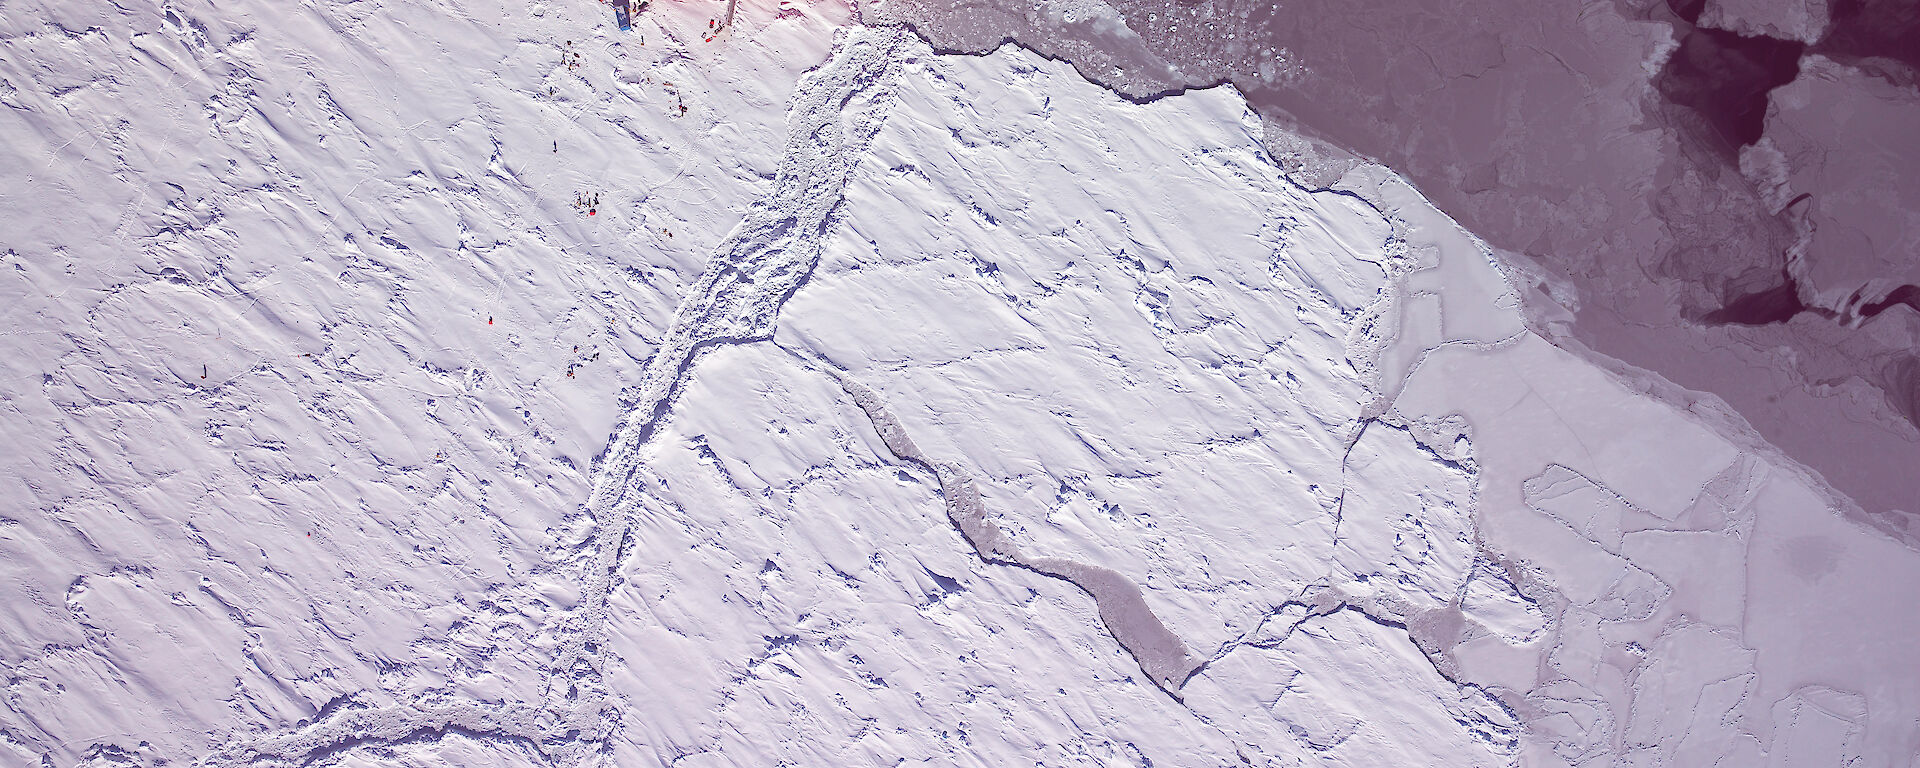 An aerial photograph taken with the high resolution digital camera in the helicopter, showing part of a survey area or Â‘transectÂ’ to the left of the ship with scientists working on the ice.